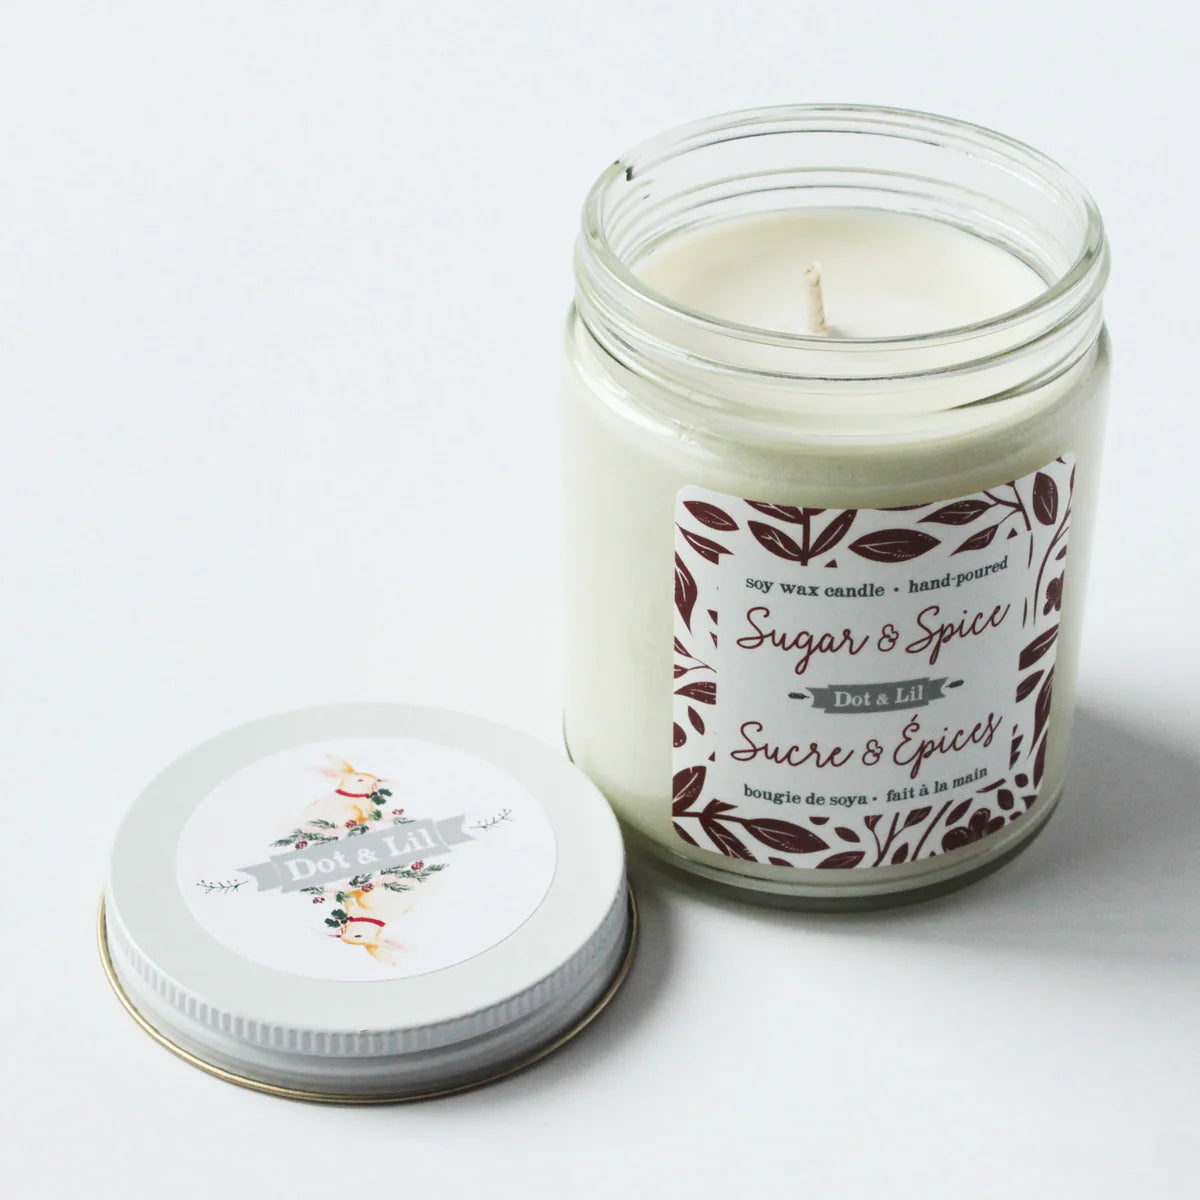 Sugar and Spice Candle - Dot and Lil